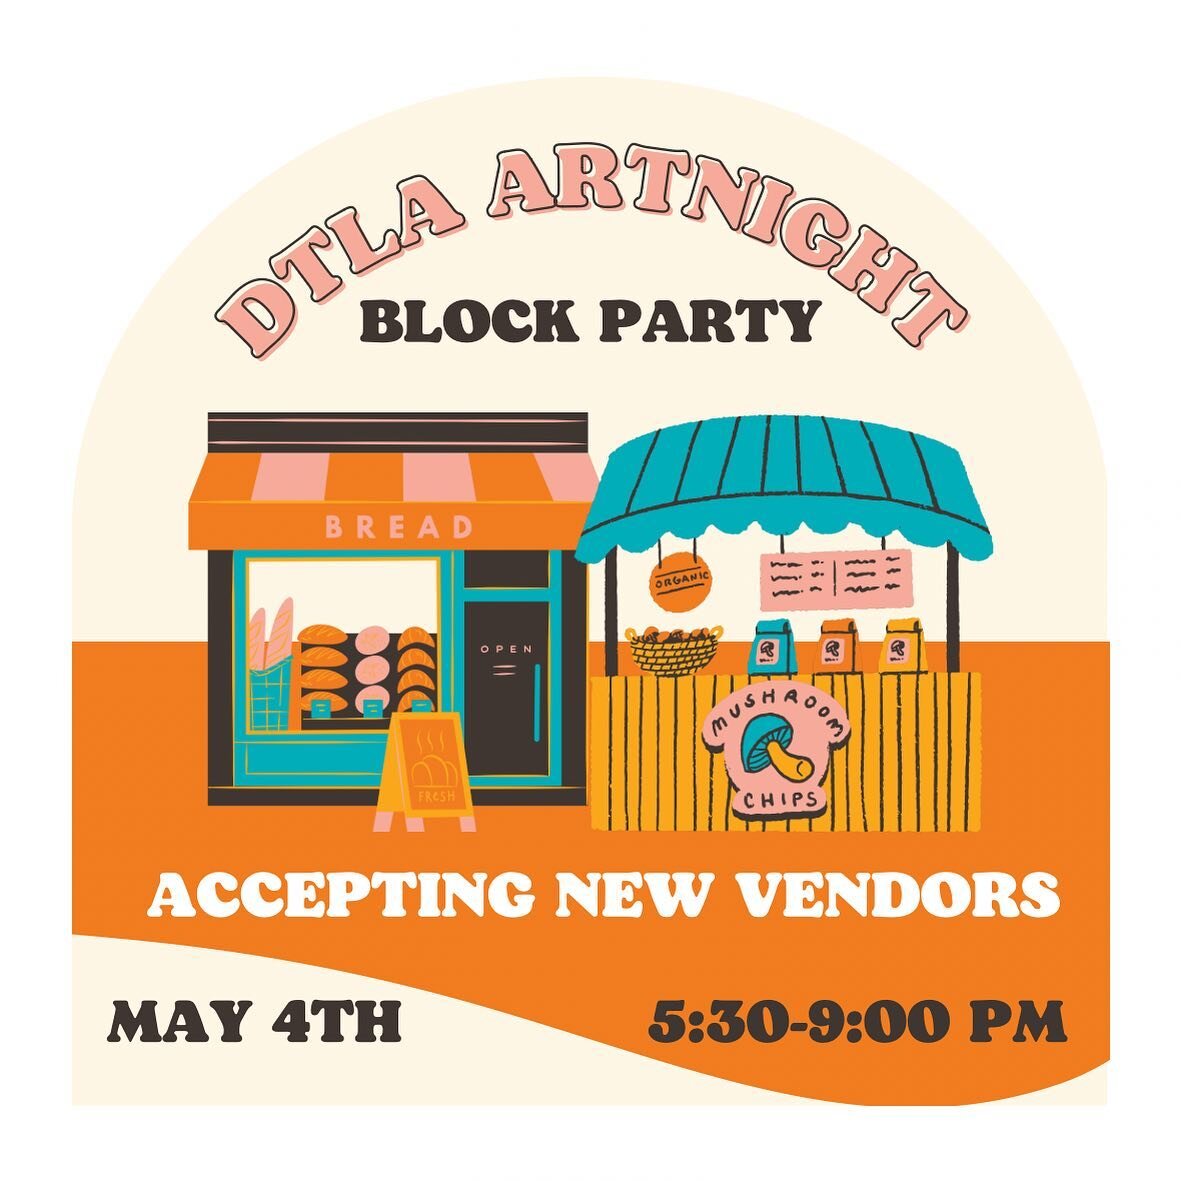 We are accepting vendor applications for our Block Party on May 4th!!! 

Submit your application at 

https://dtlaartnight.com/vendor-submission

Use code FFMay4th for 50% off your booth selection 

#art #crafts #farmersmarket #vendors #foodtruck #bl